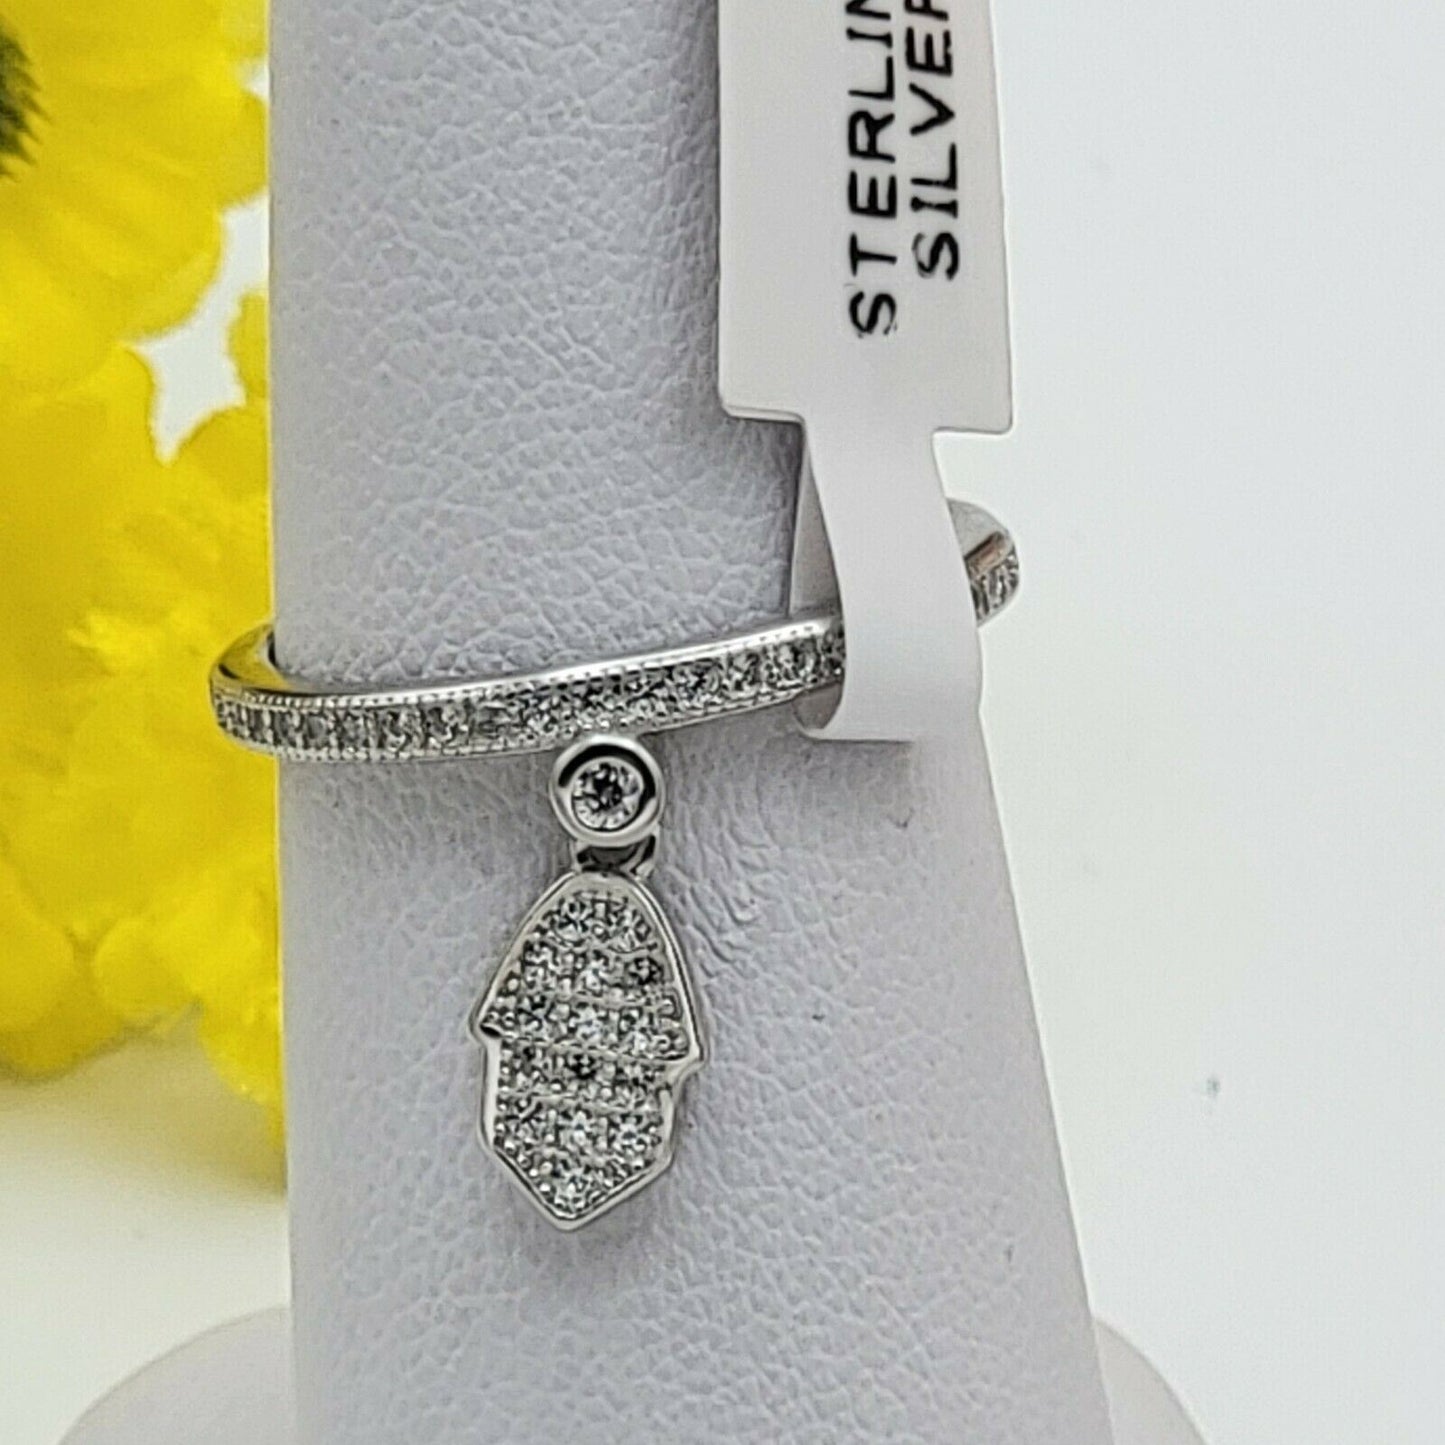 Solid 925 Sterling Silver. Micro Pave Cubic ZC Band Hamsa Hand Ring